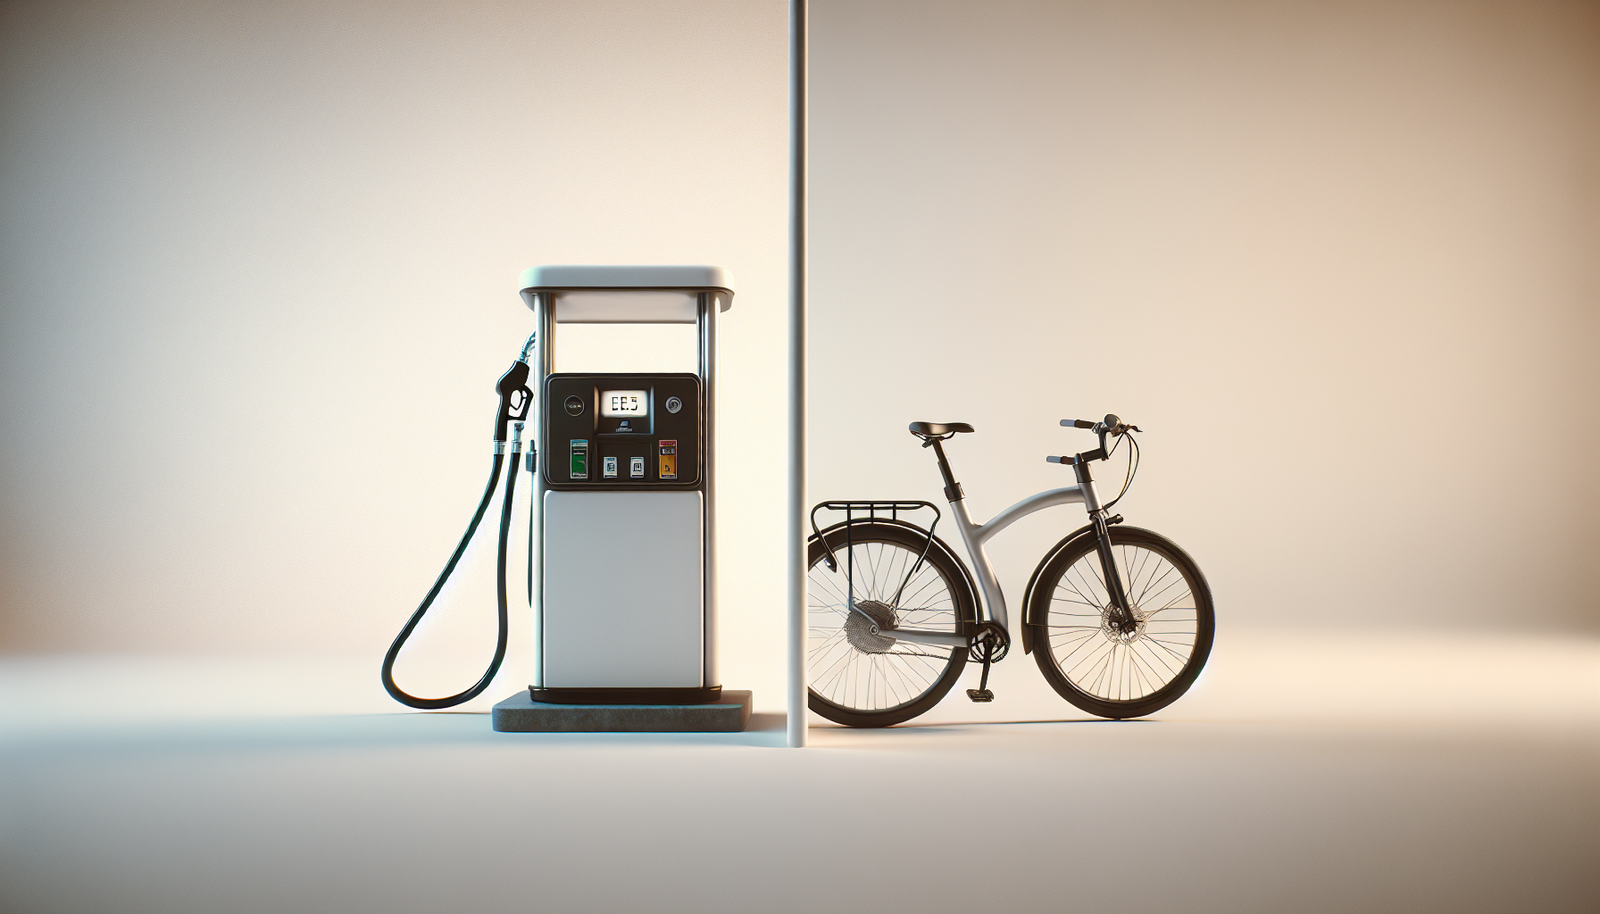 How Does The Cost Of Charging An Electric Bike Compare To Gasoline For A Car?